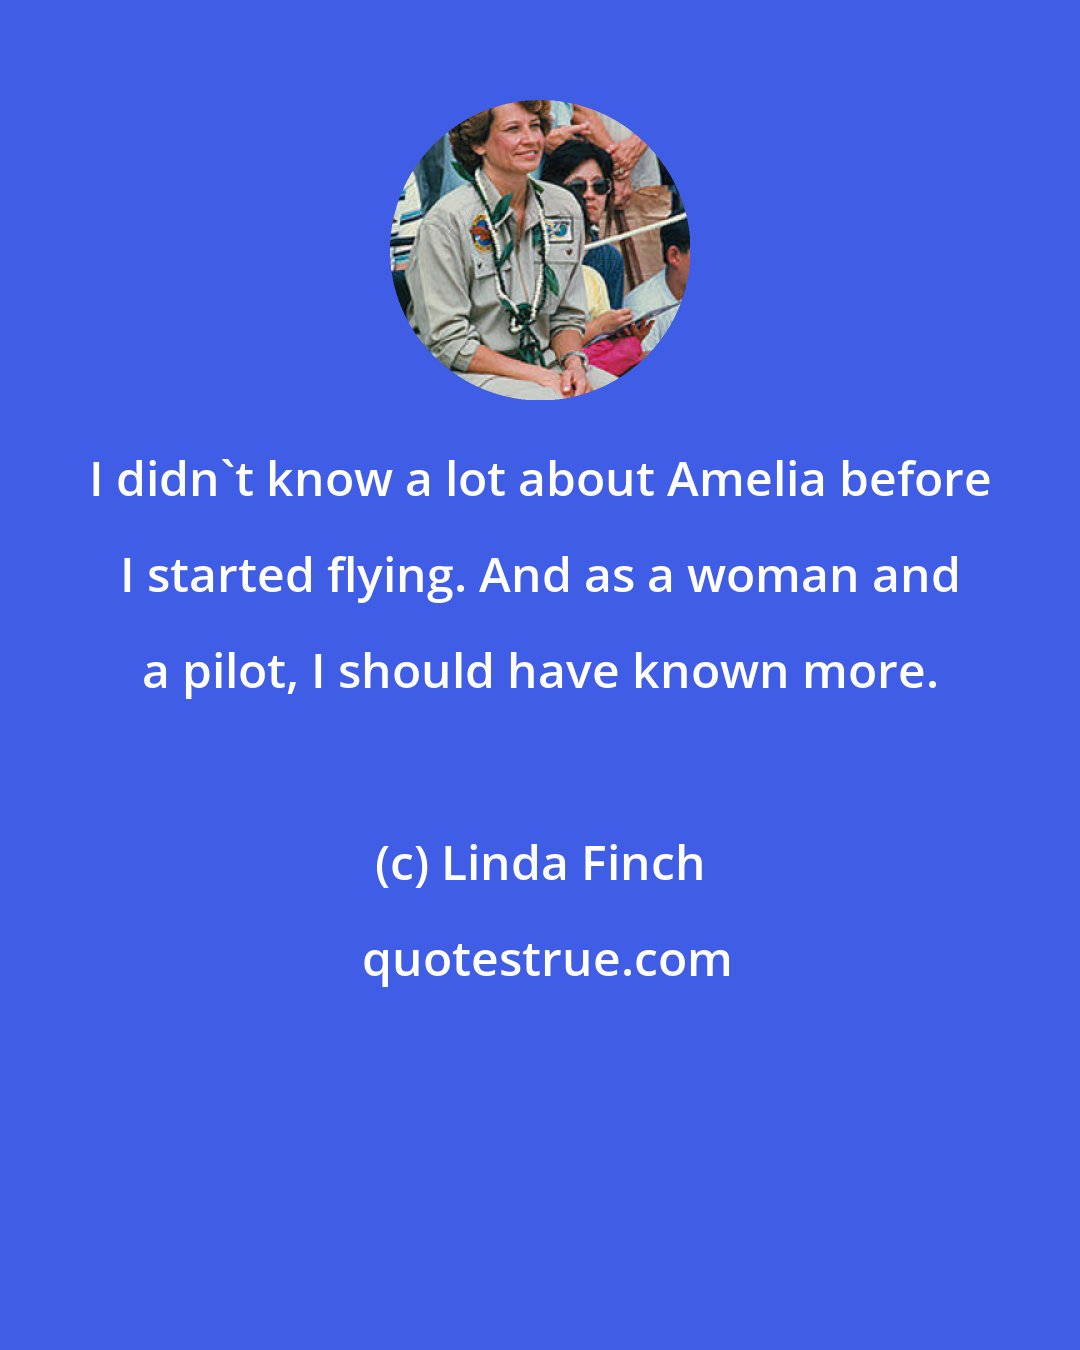 Linda Finch: I didn't know a lot about Amelia before I started flying. And as a woman and a pilot, I should have known more.